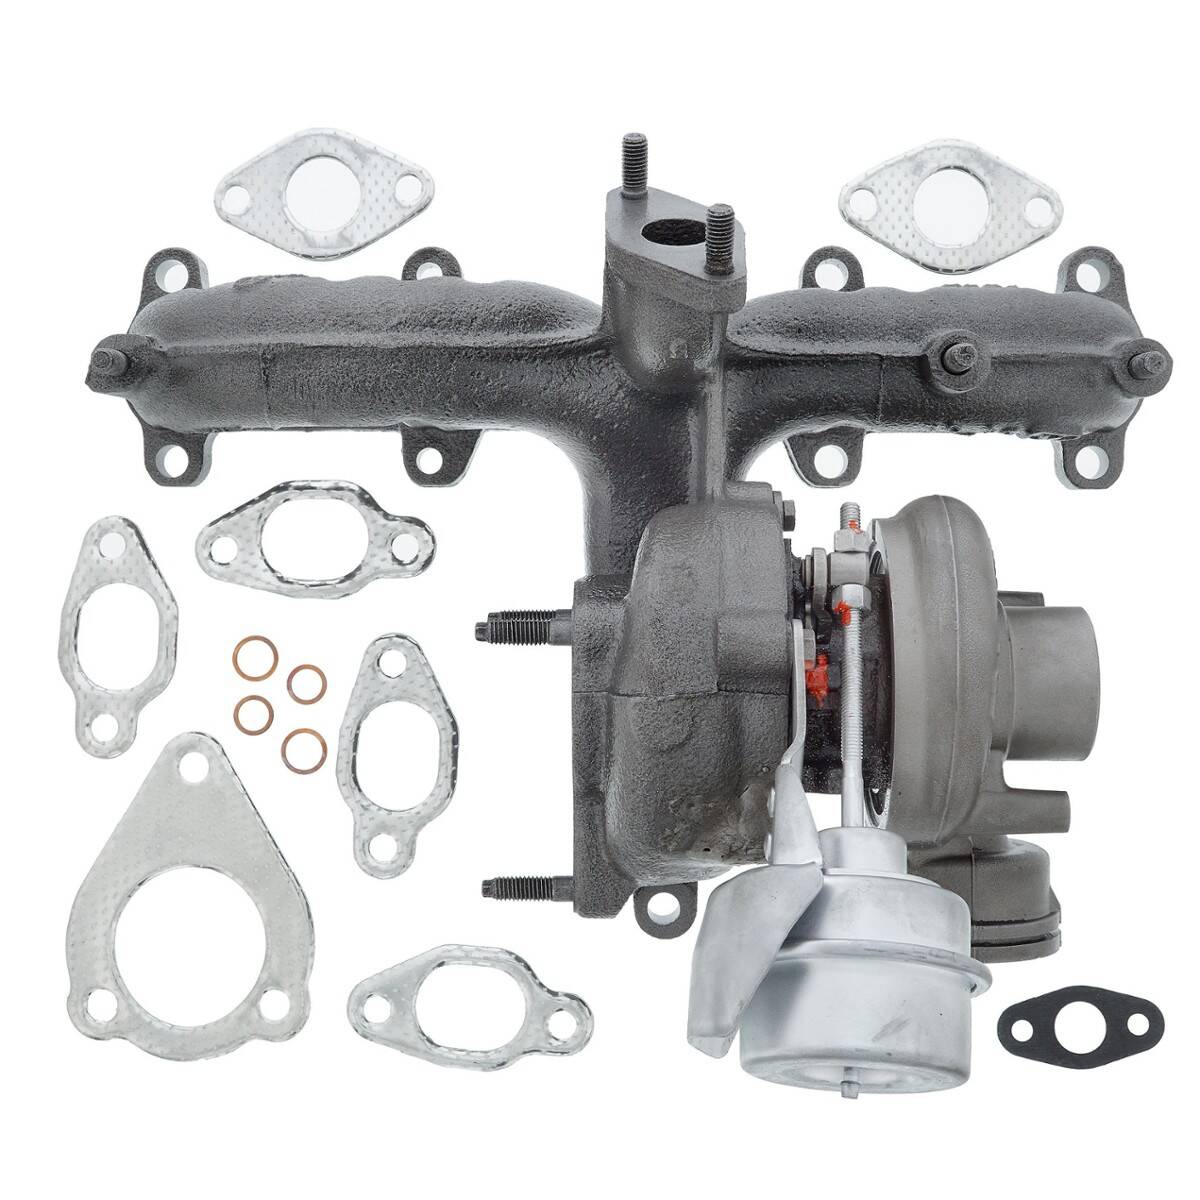 TURBOCHARGER TURBO REMANUFACTURED 54399700021 5439-970-0021